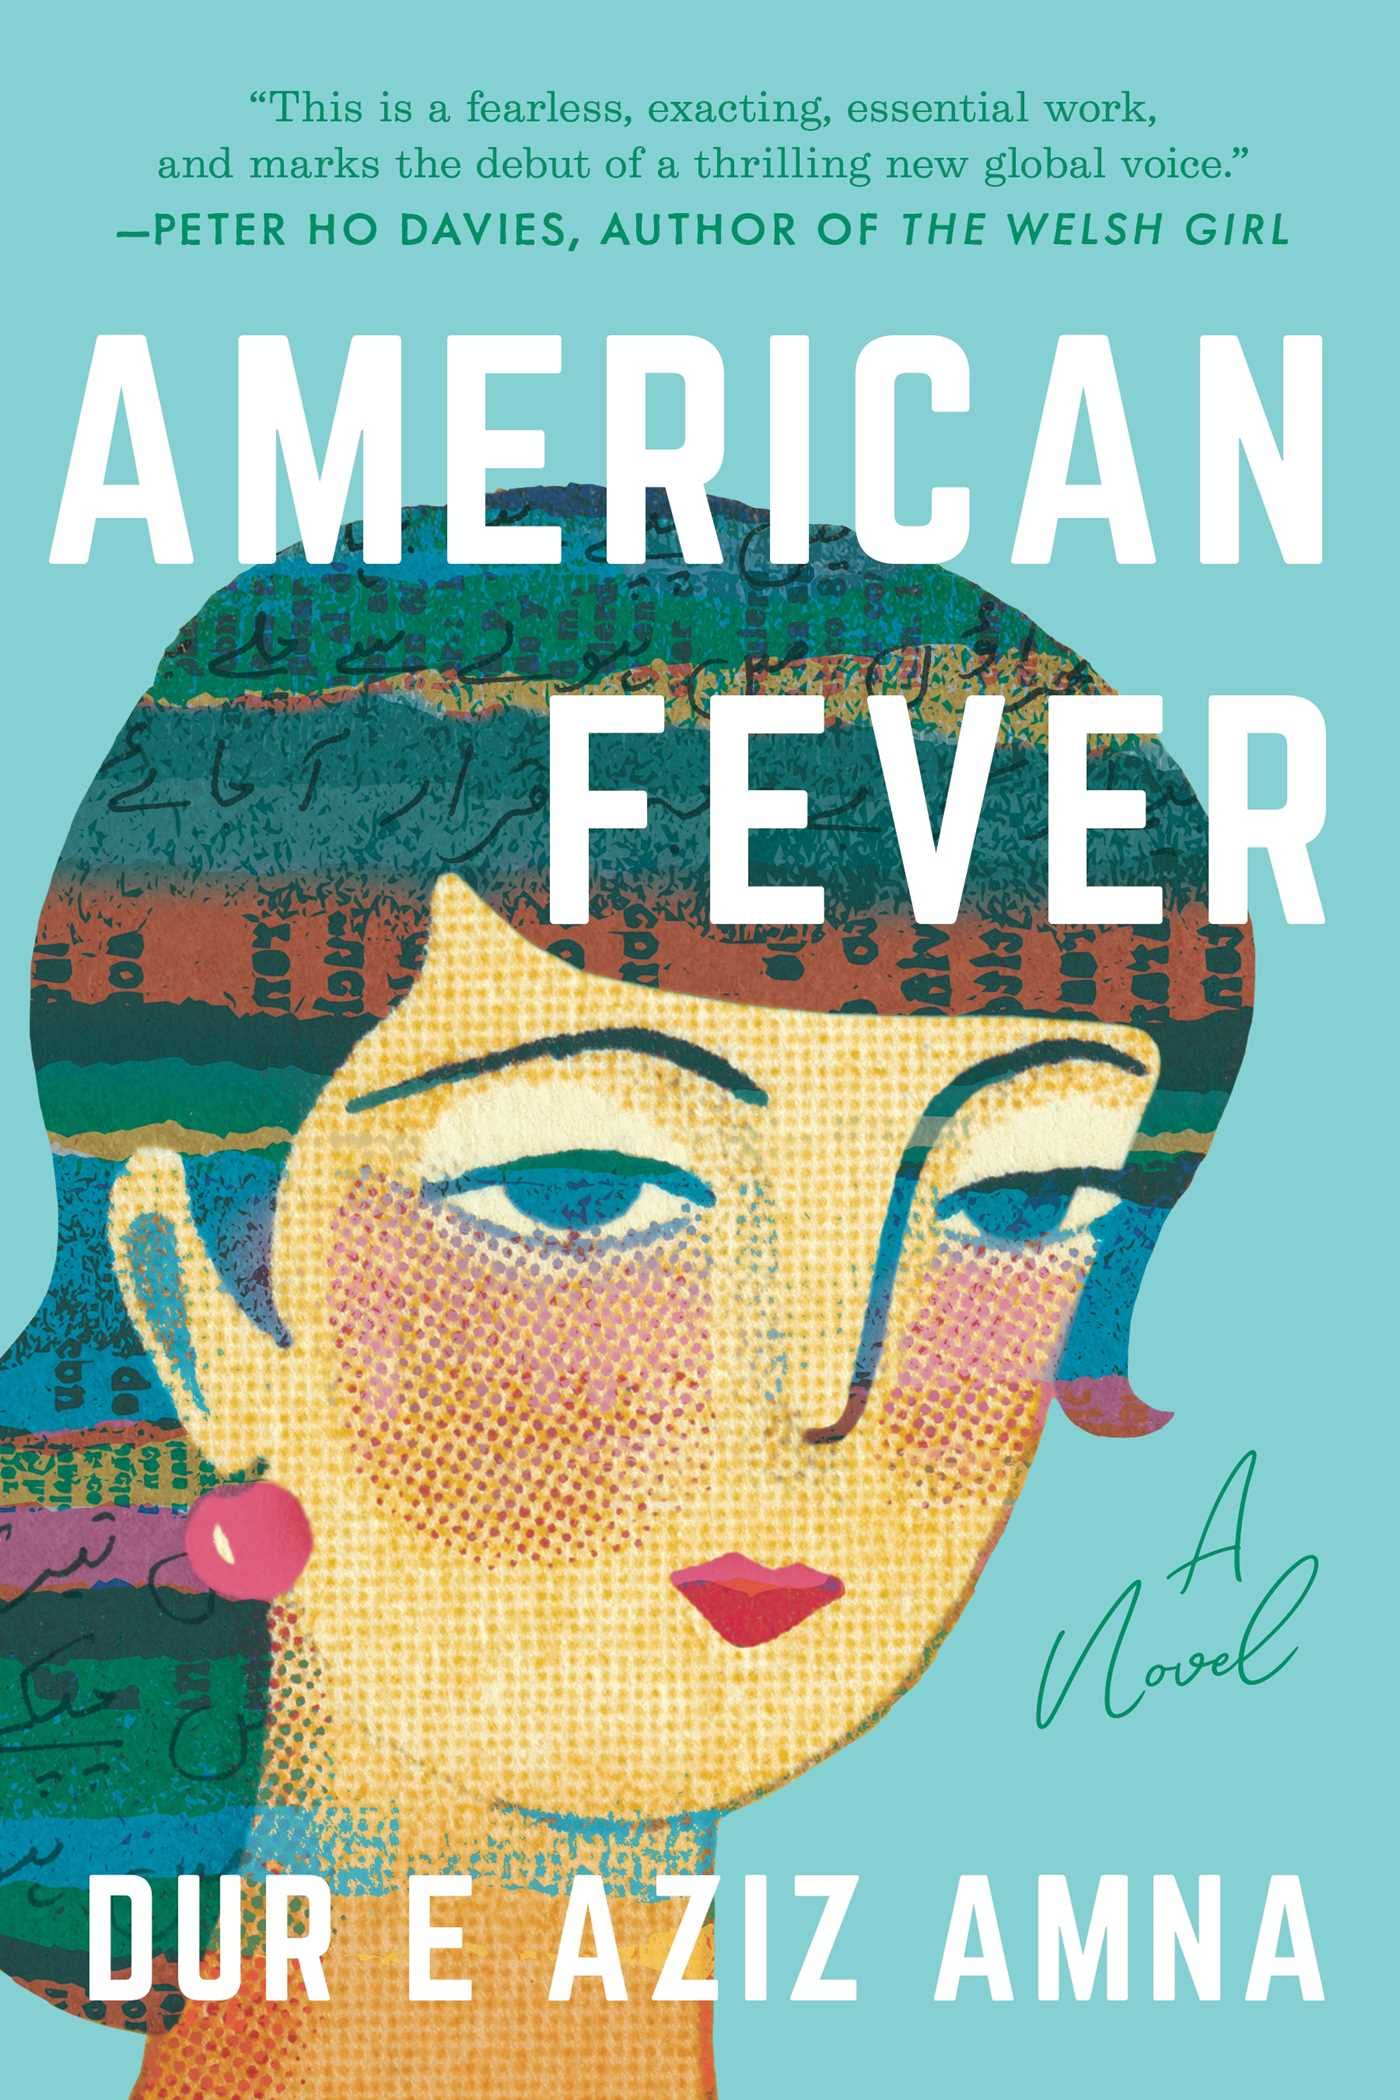 Image for "American Fever"